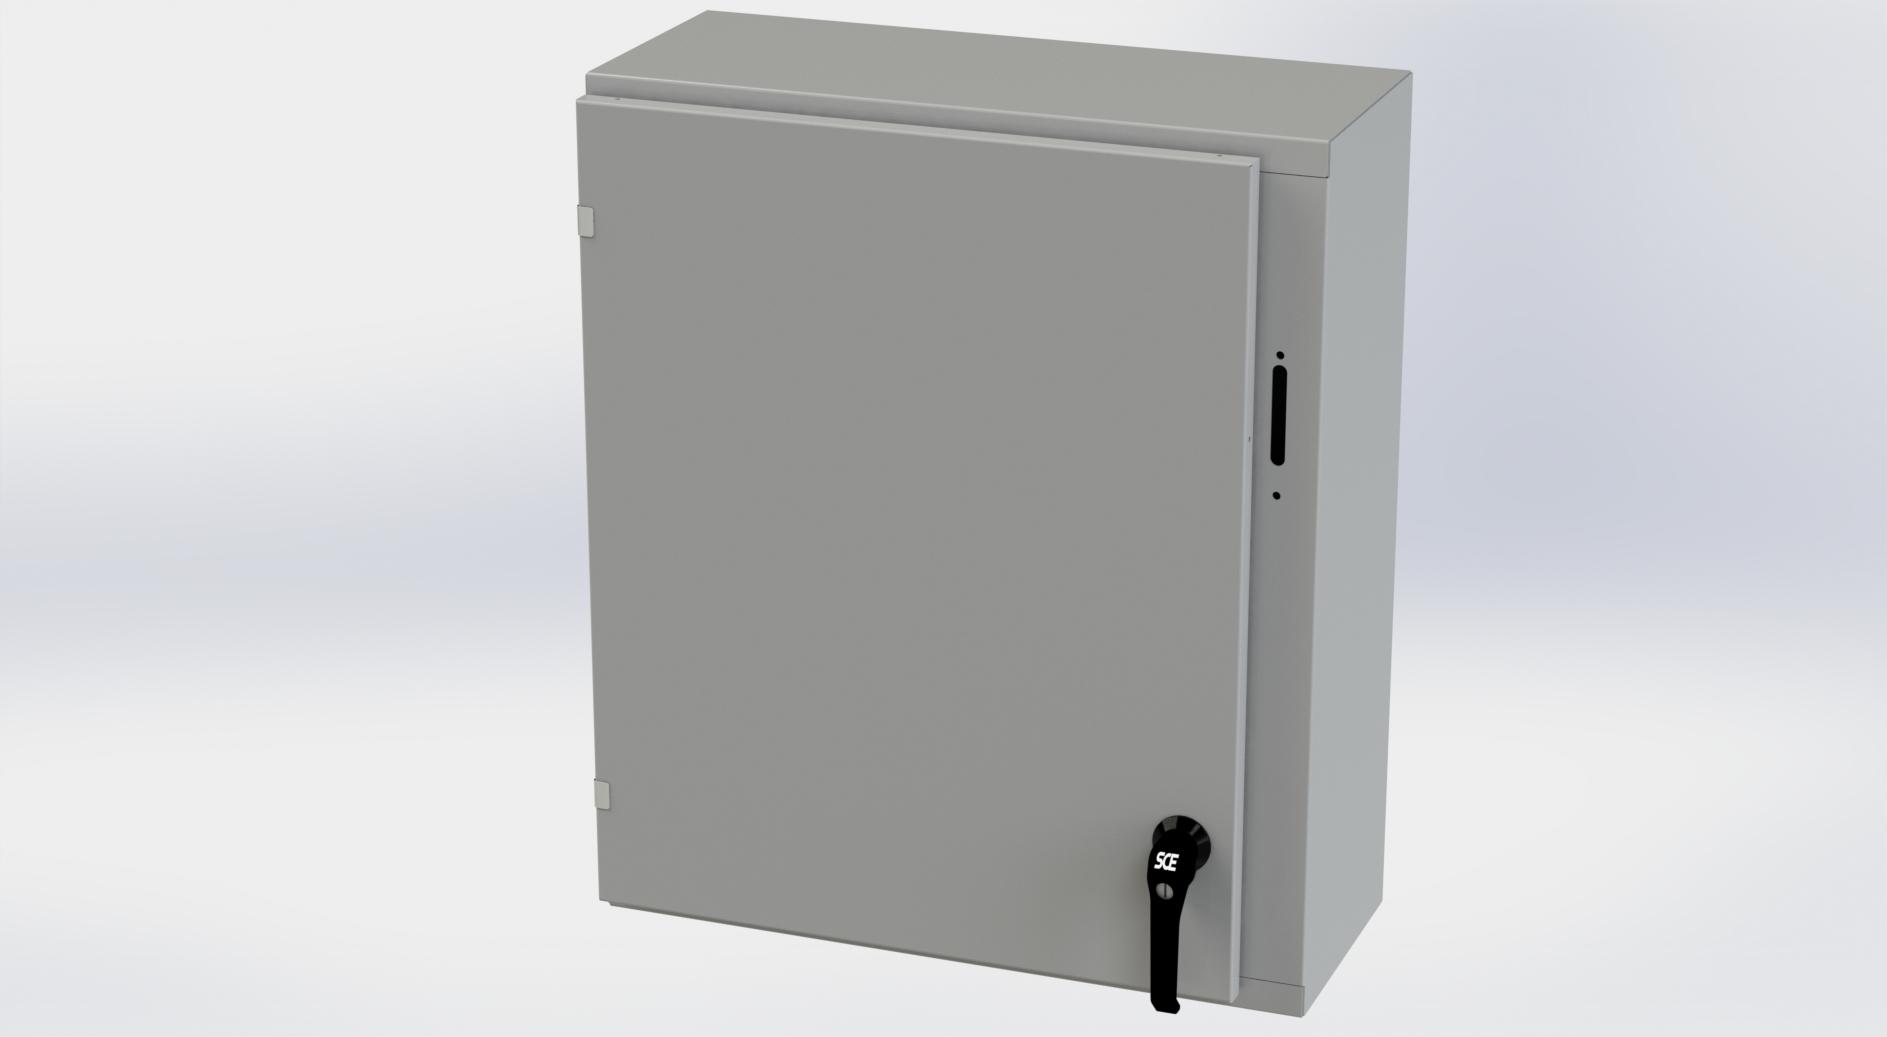 Saginaw Control SCE-30XEL2510LP XEL LP Enclosure, Height:30.00", Width:25.38", Depth:10.00", ANSI-61 gray powder coating inside and out. Optional sub-panels are powder coated white.